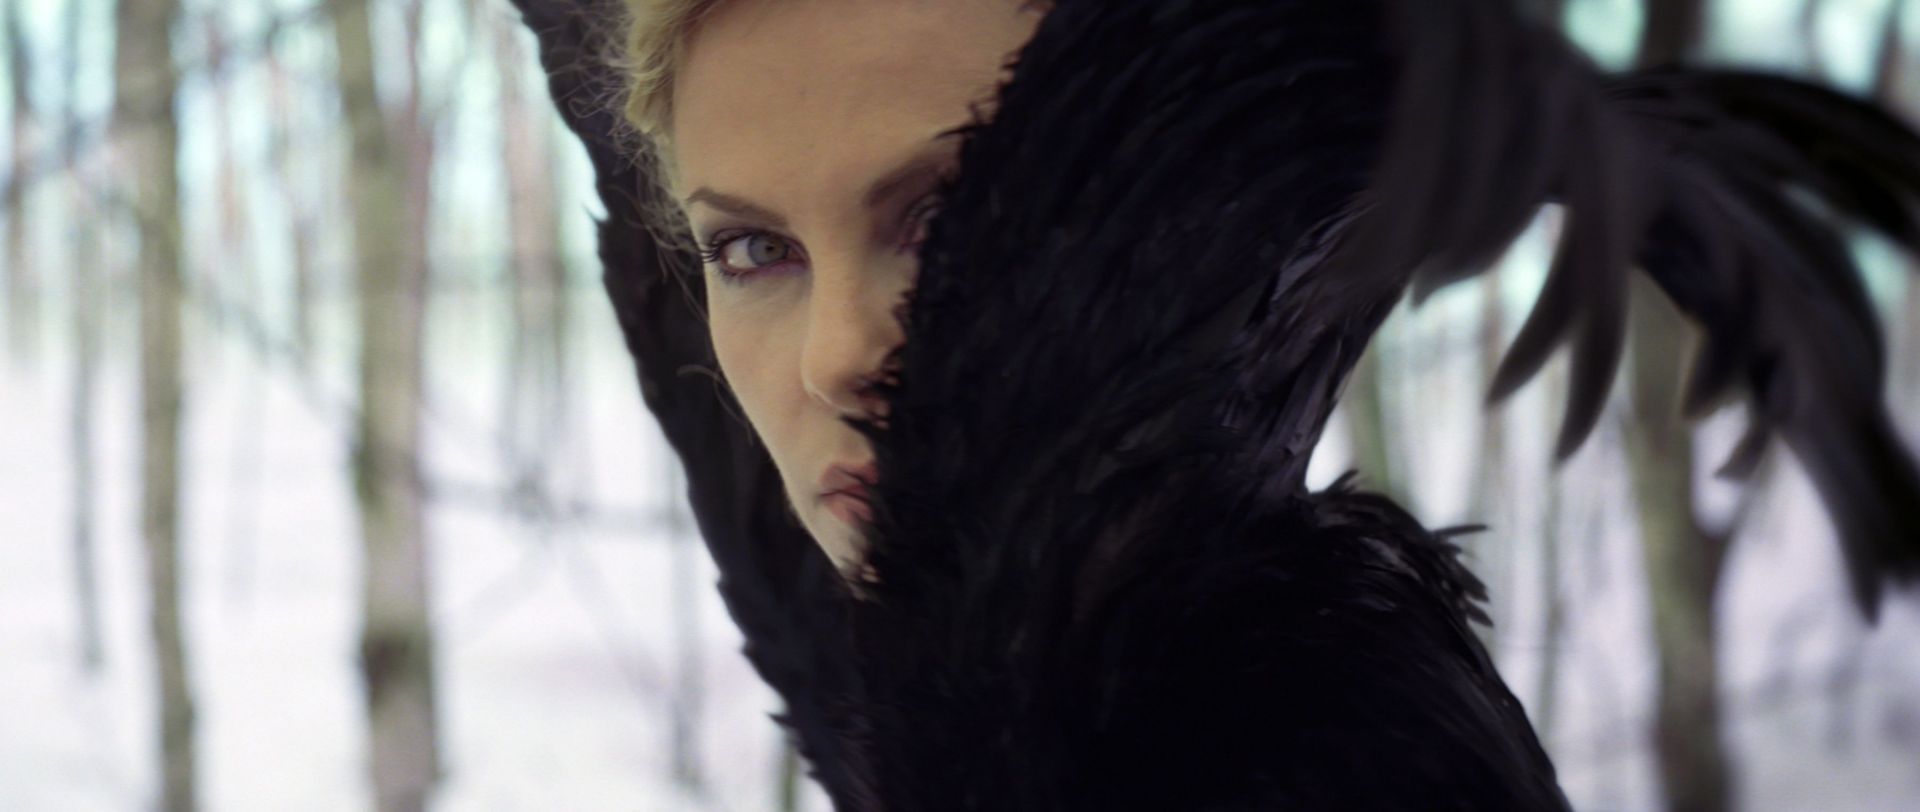 Snow White and the Huntsman Photo #2